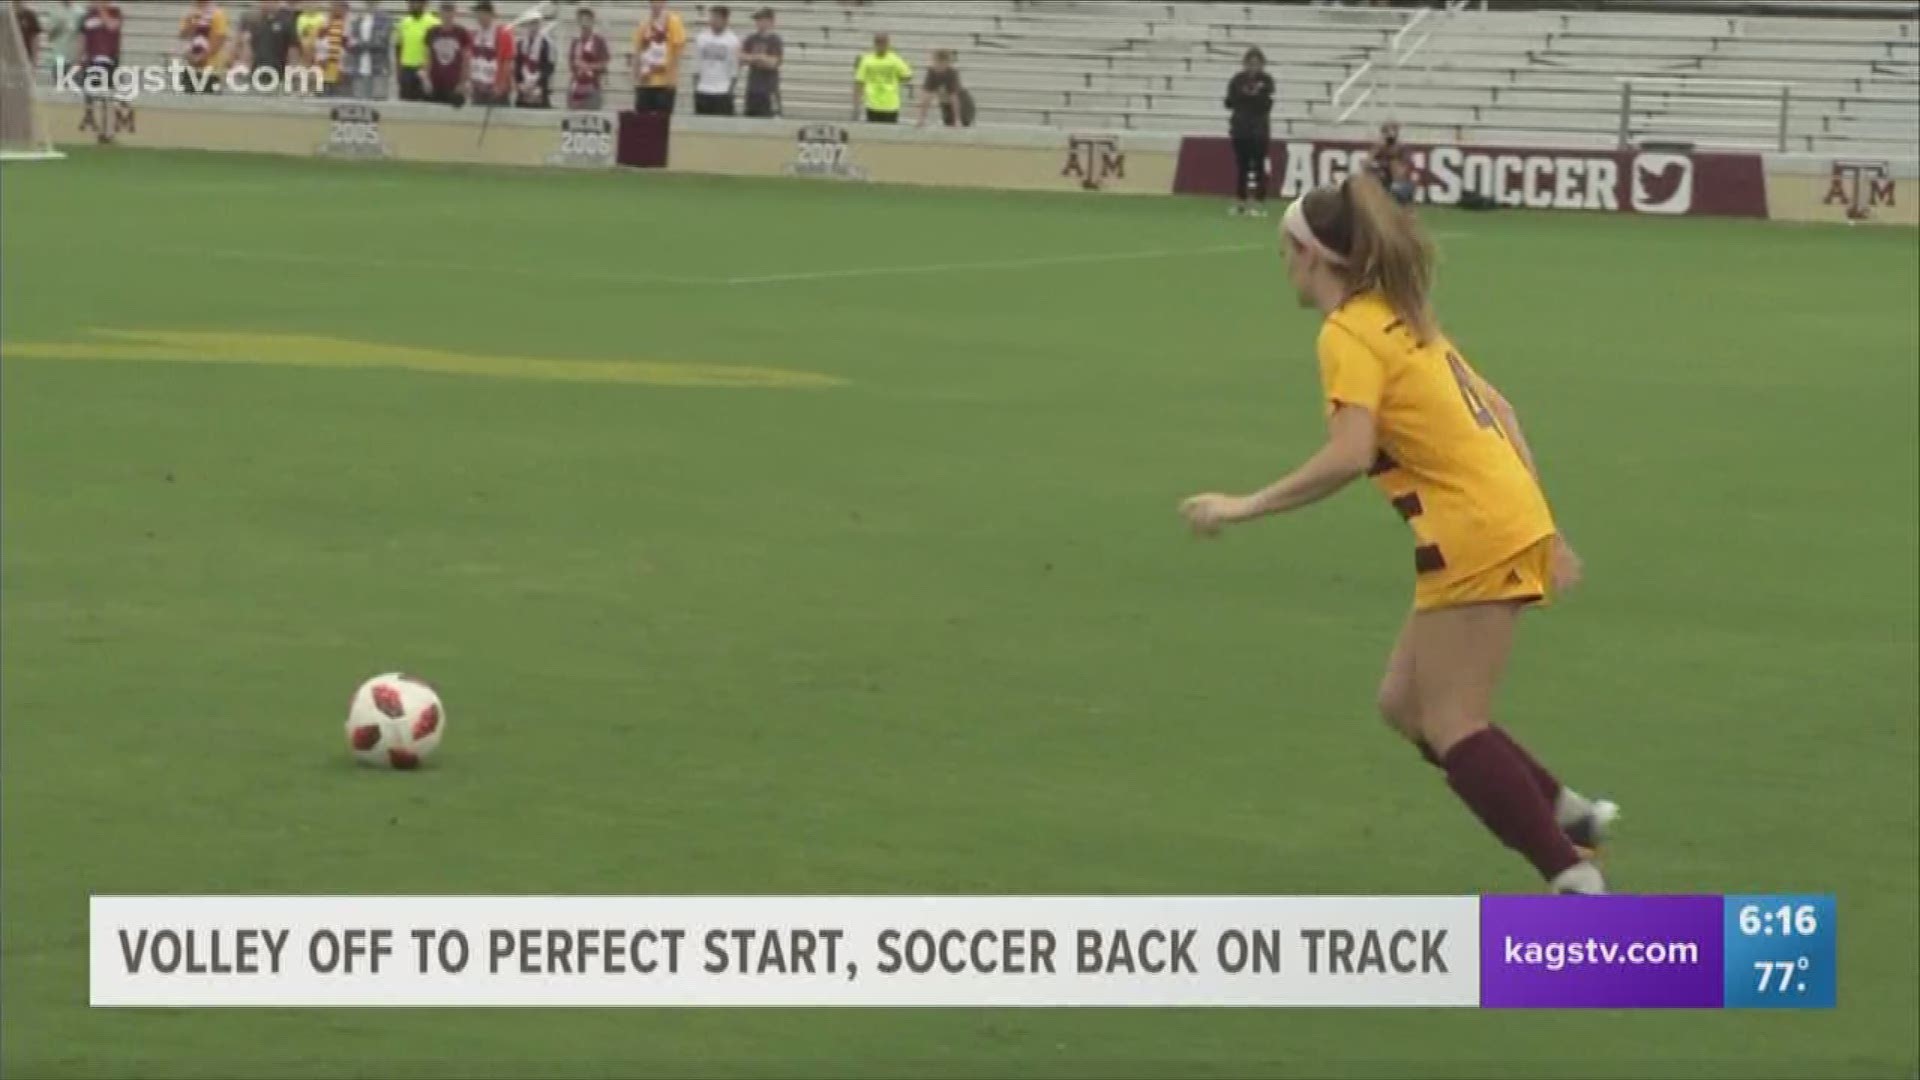 Following its first loss of the season, the fifth ranked Texas A&M soccer rebounded with a 2-0 win over Georgia.